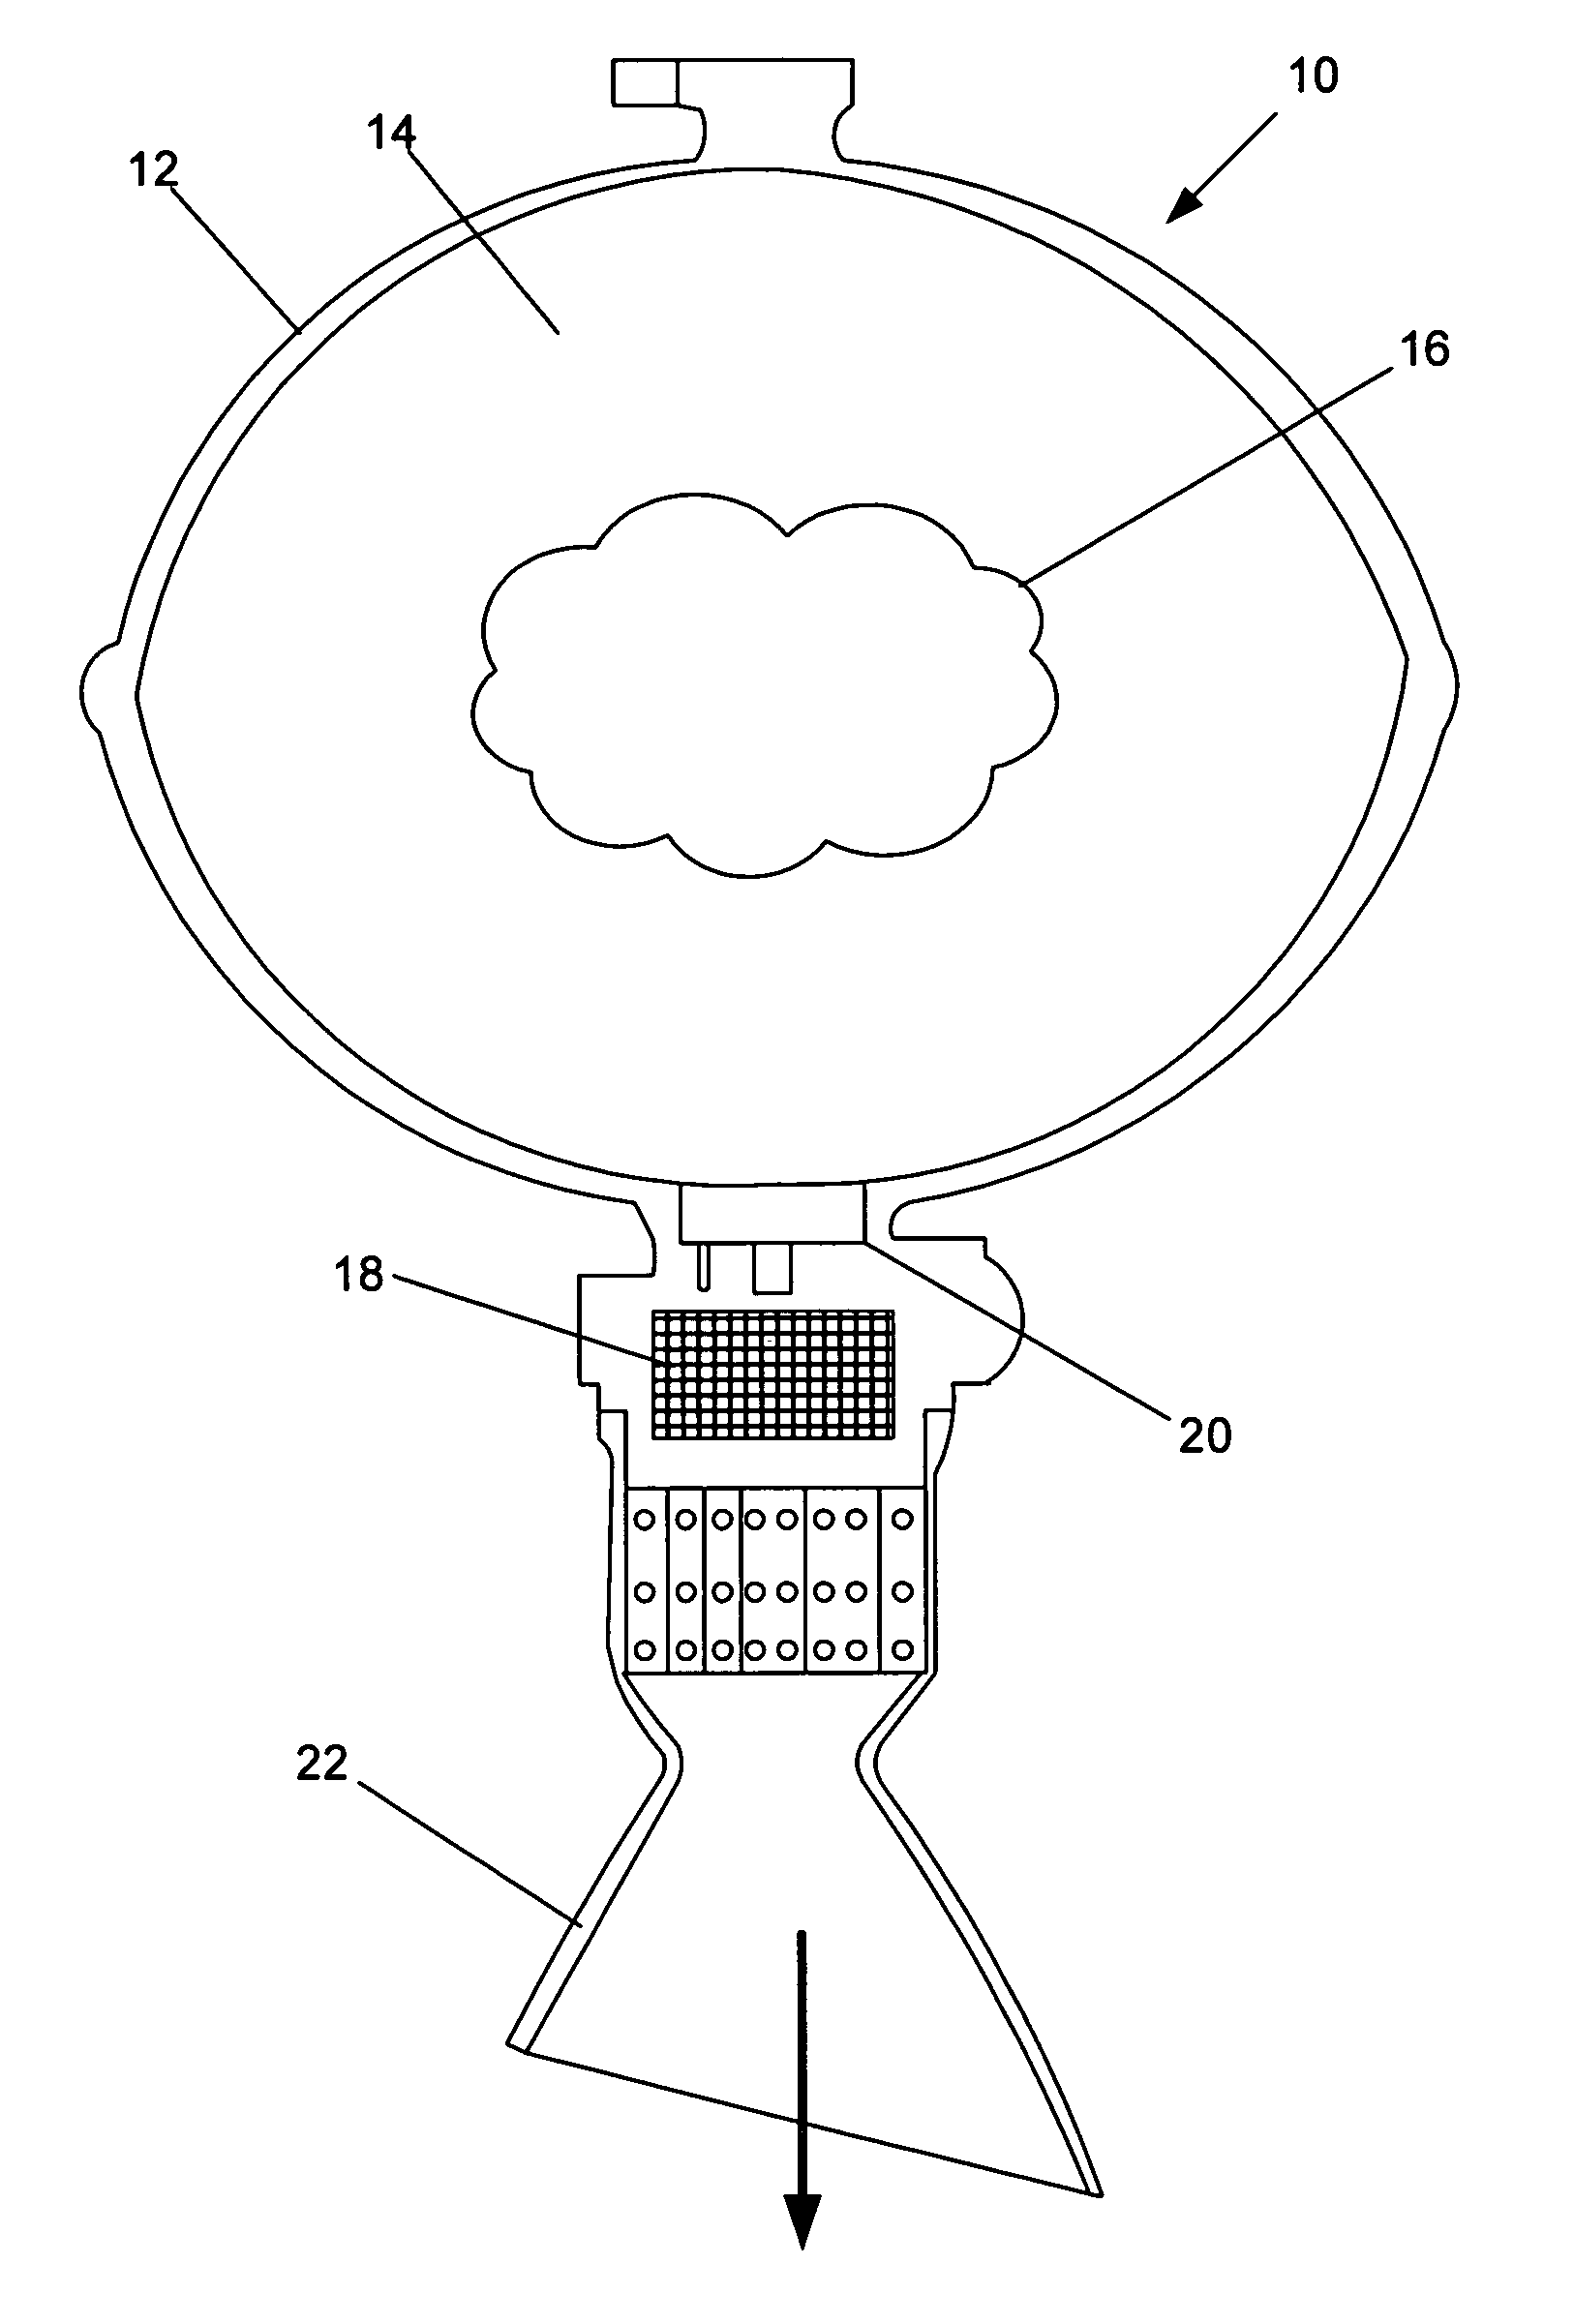 Decoy device and system for anti-missile protection and associated method